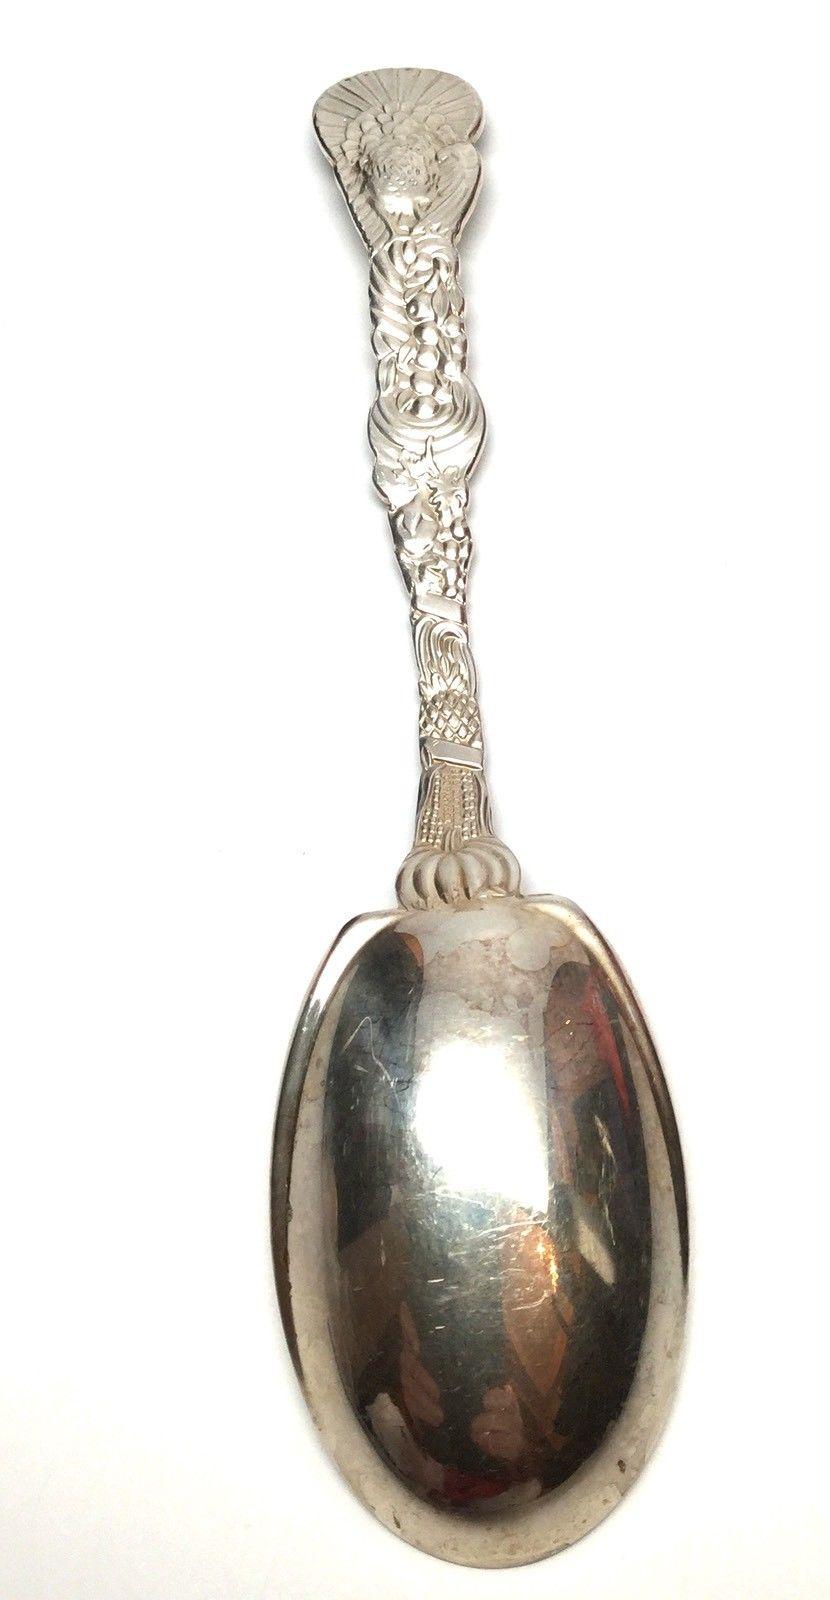 Lovely Tiffany & Co. sterling silver cranberry serving spoon. Its theme is Thanksgiving and it is beautifully decorated, front and back, with a turkey, cornucopia, pumpkins, and corn. 
Measurement: Length: 7 3/16 inches. Width of spoon: 1 7/8